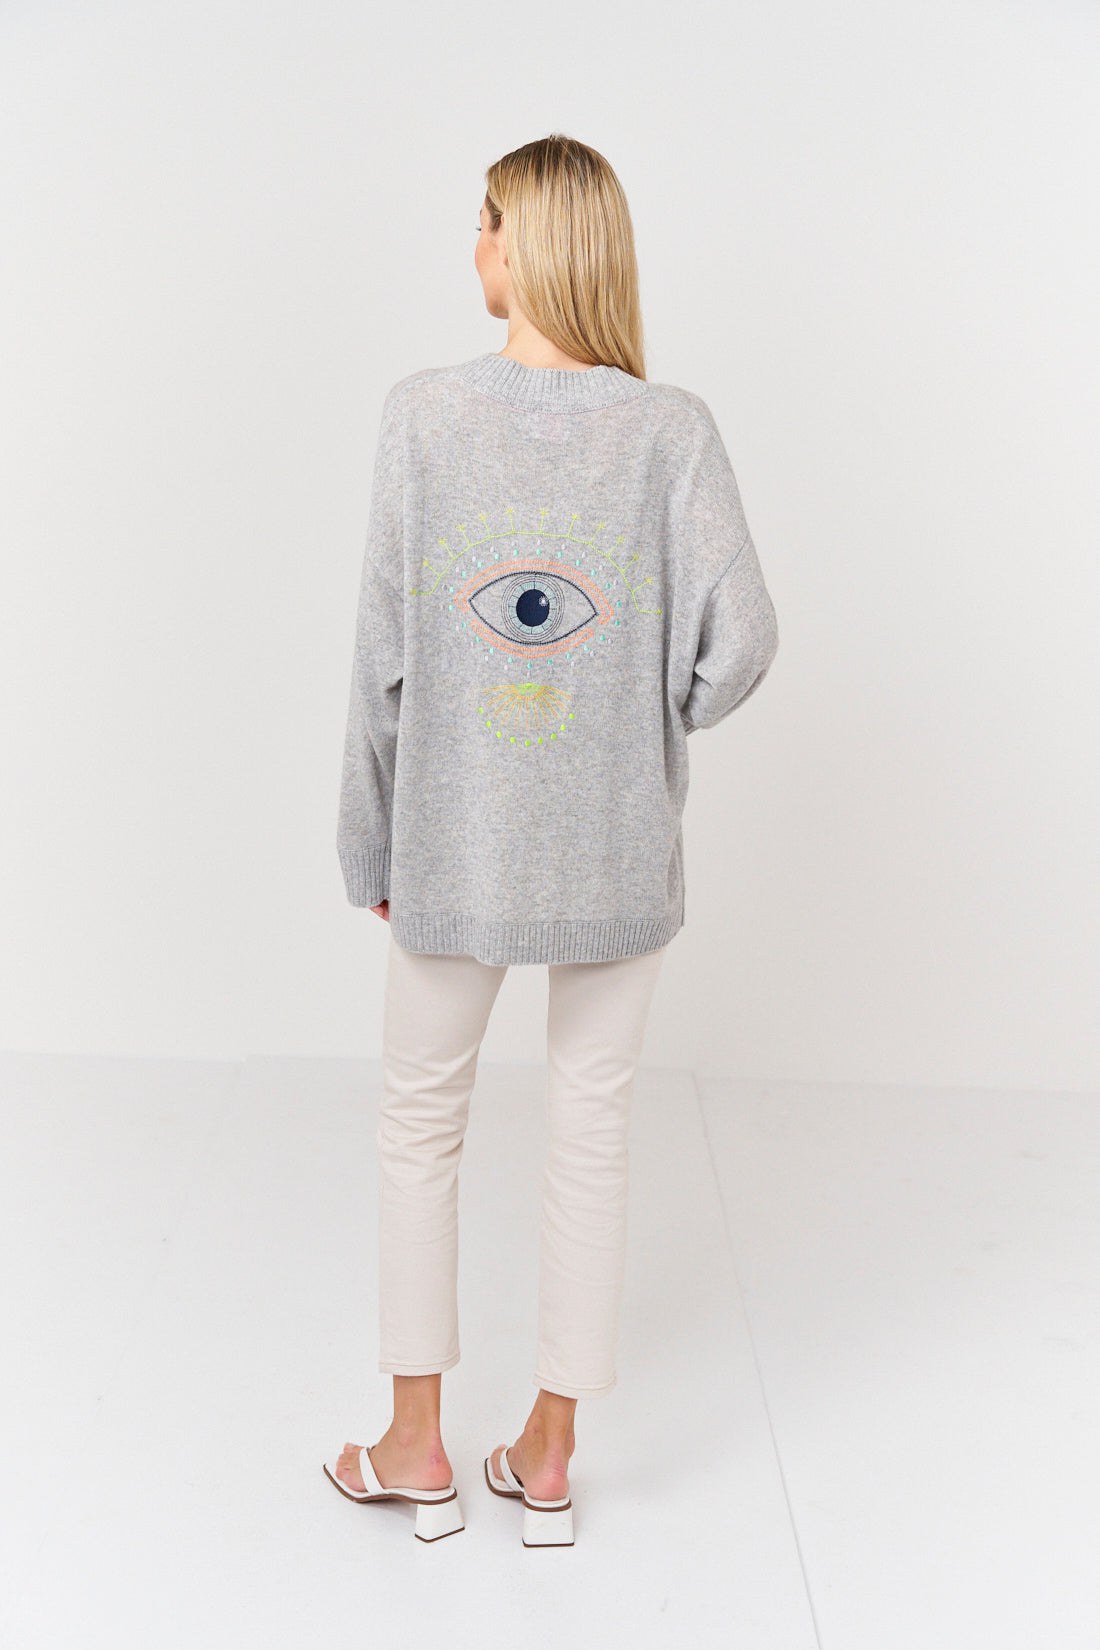 Embroidered Eye Cardigan Super Grey, Sweater by Brodie Cashmere | LIT Boutique